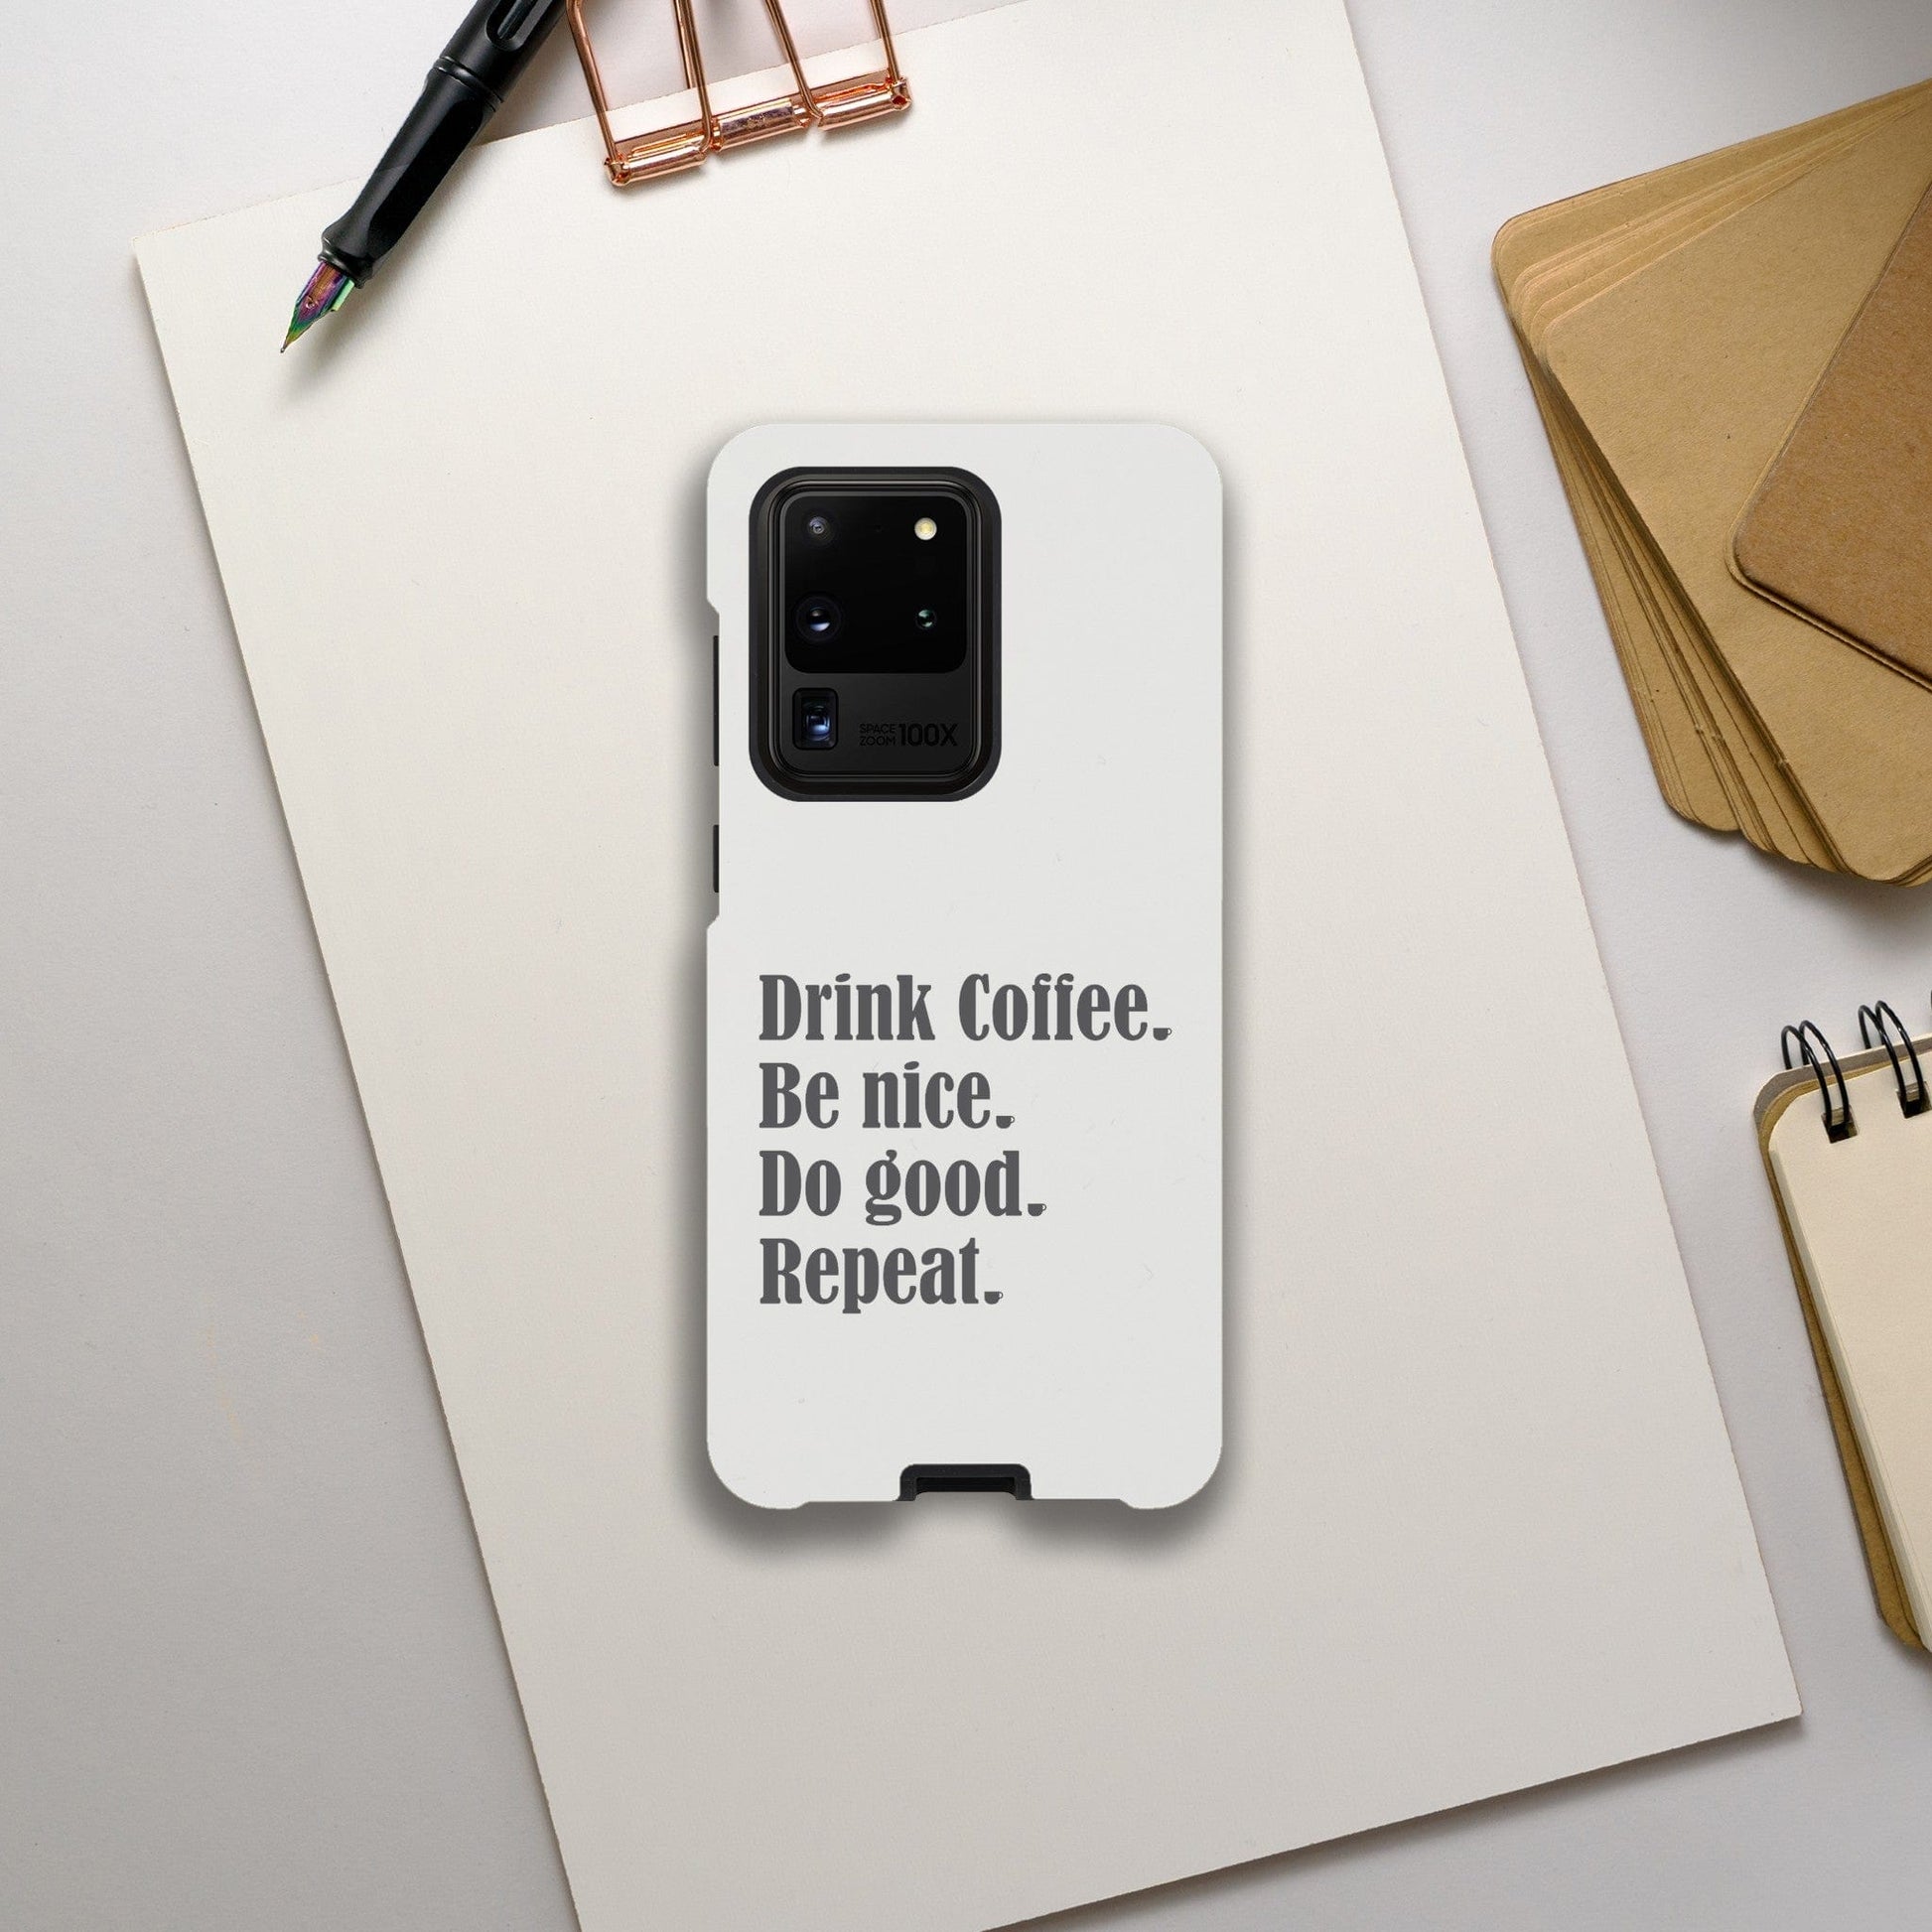 Good Bean Gifts "Drink Coffee, Be Nice, Do Good, Repeat" Tough Phone case (Gray imprint) Galaxy S20 Ultra